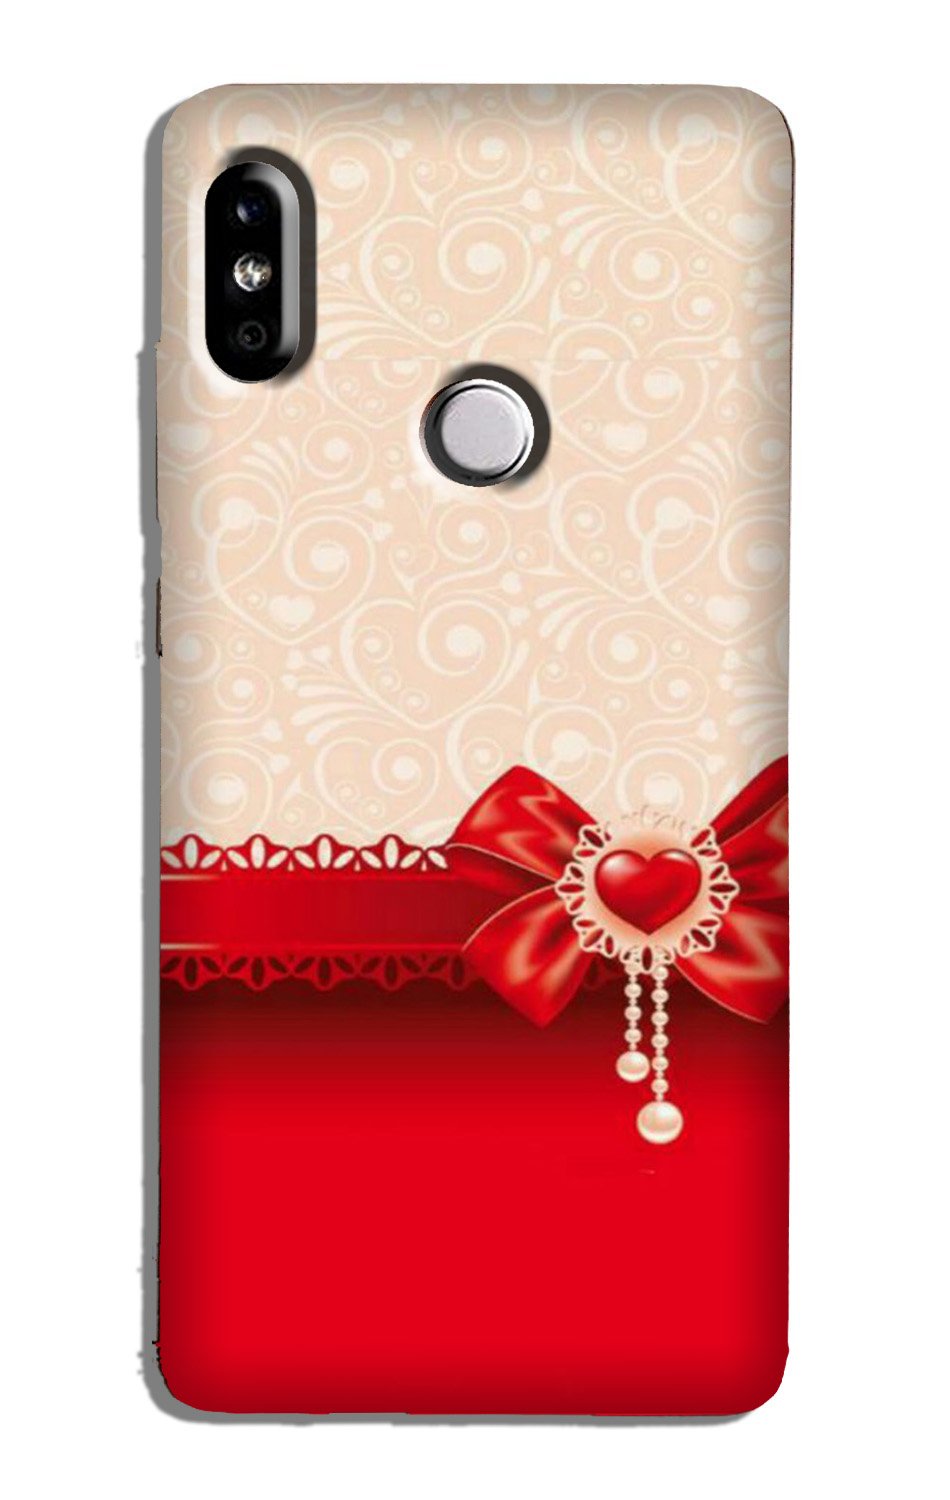 Gift Wrap3 Case for Redmi Note 5 Pro